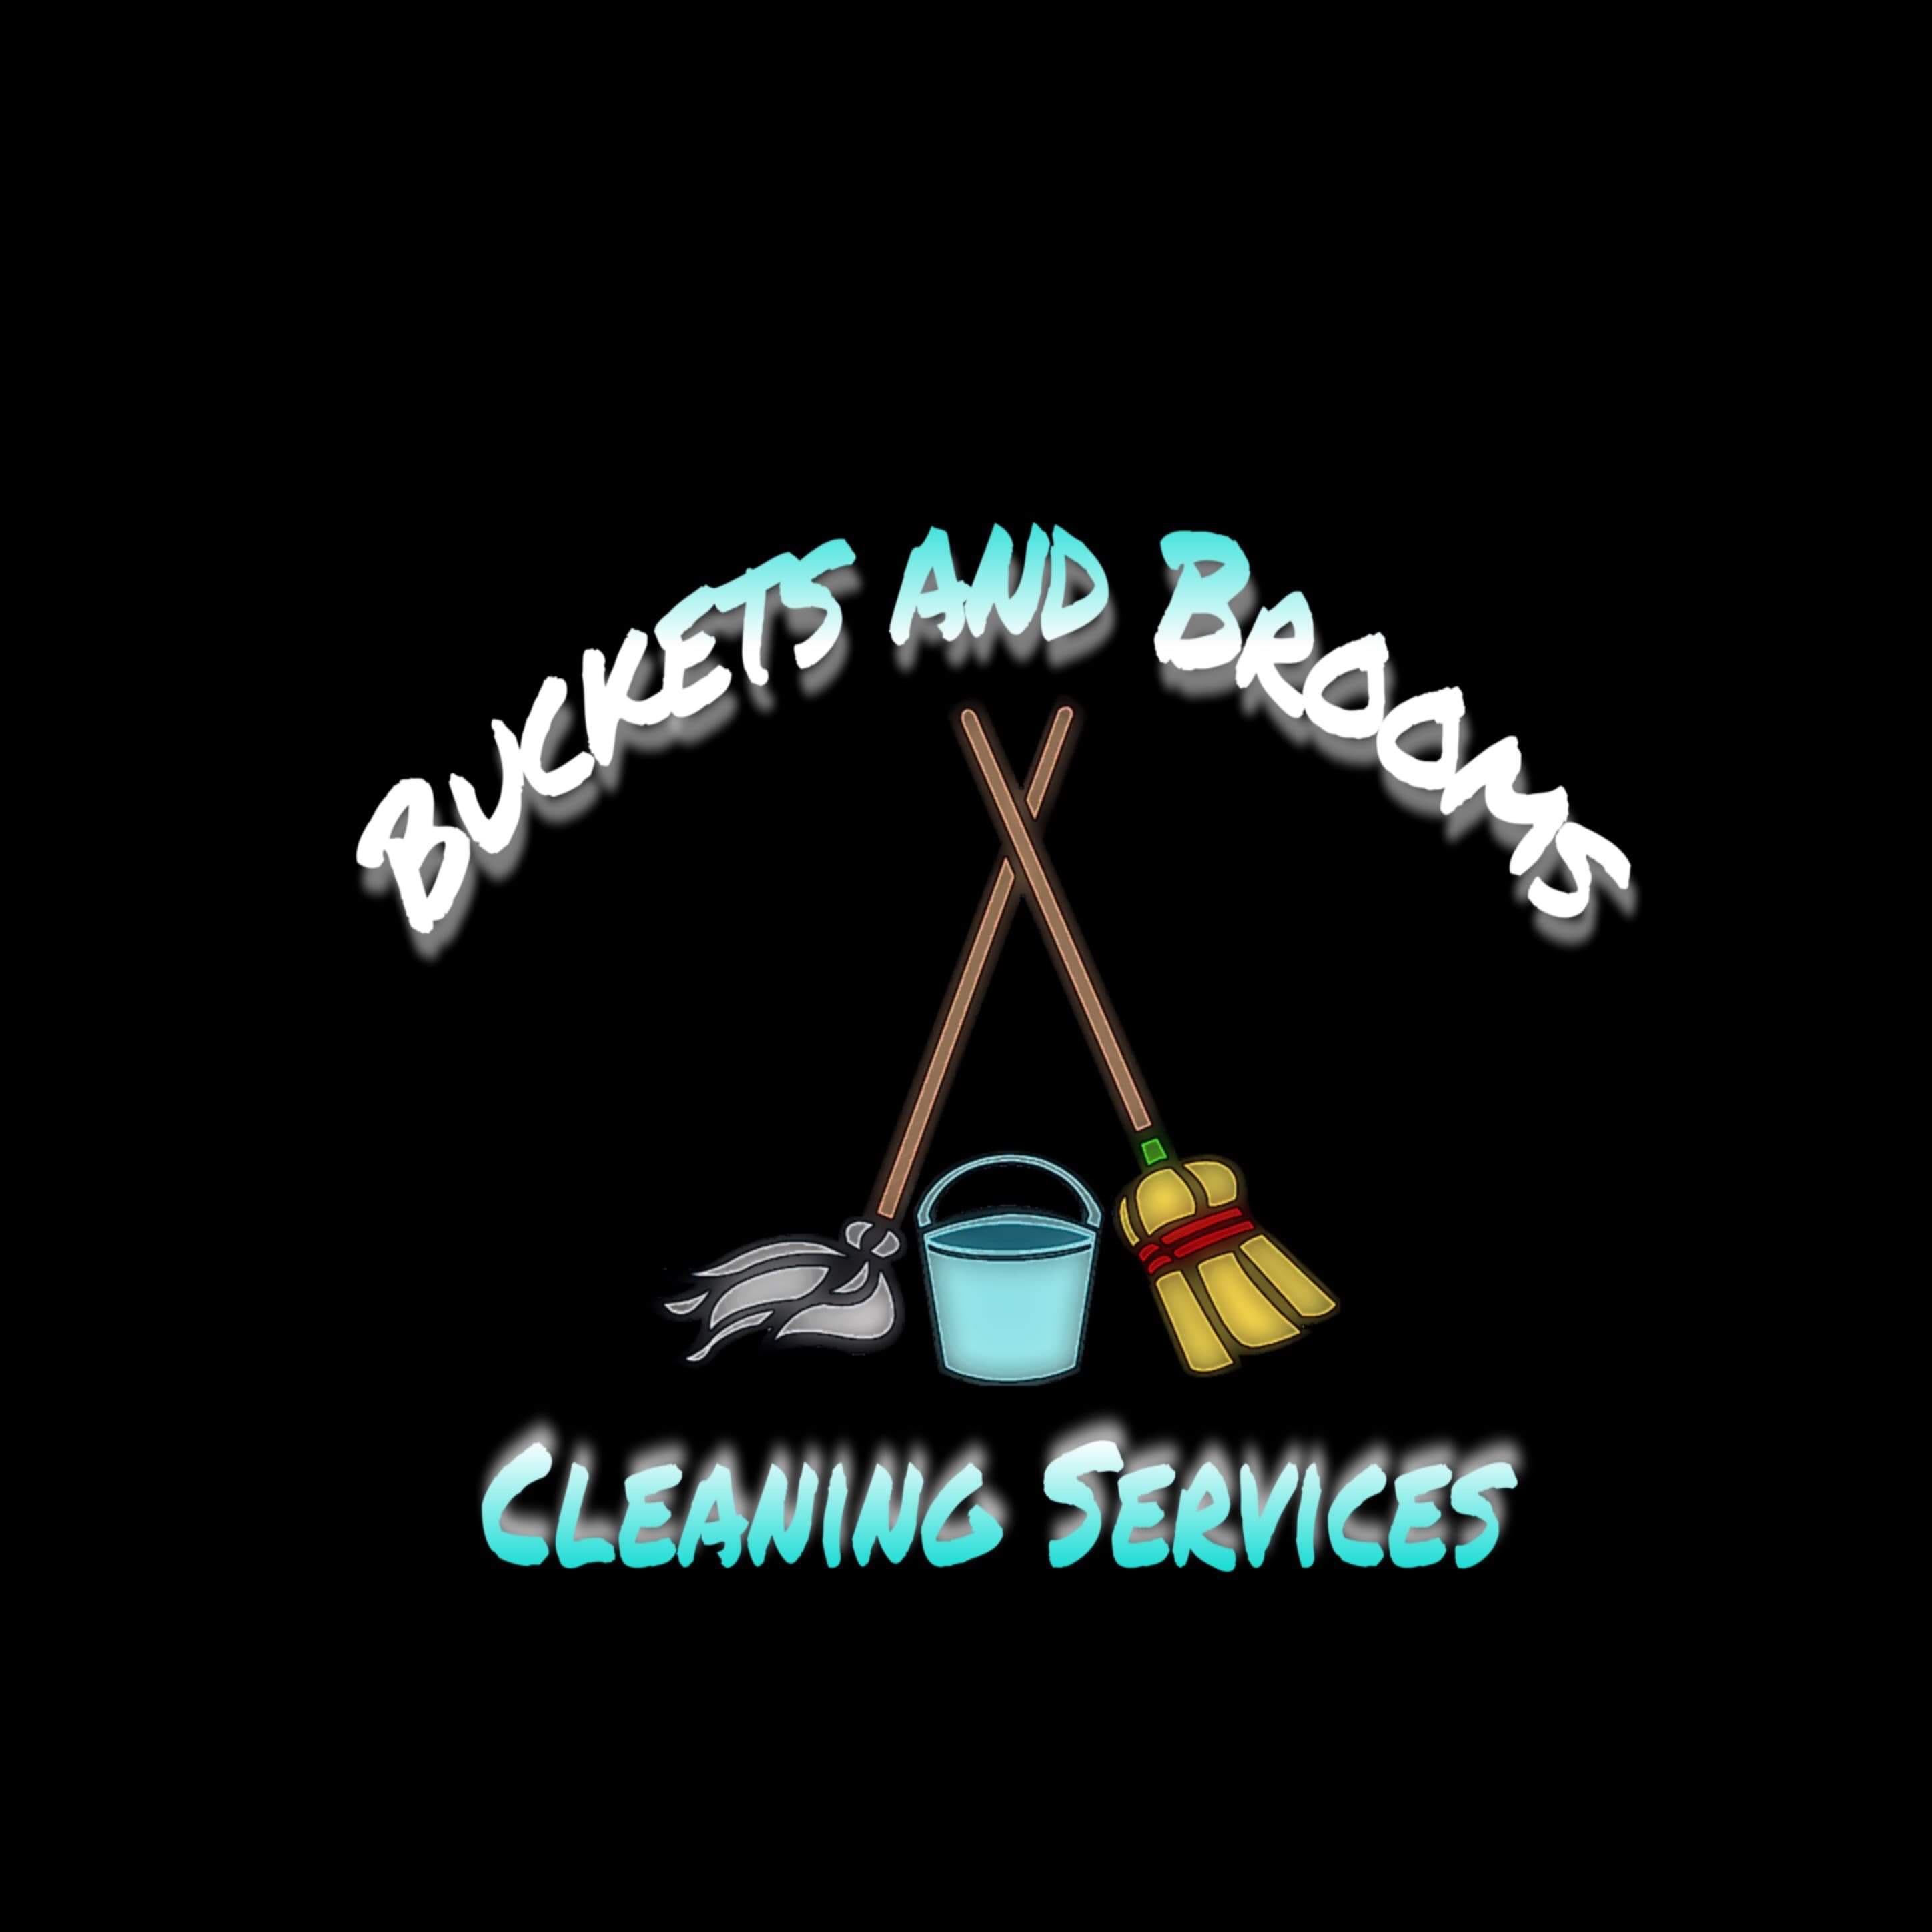 Buckets And Brooms Cleaning Services